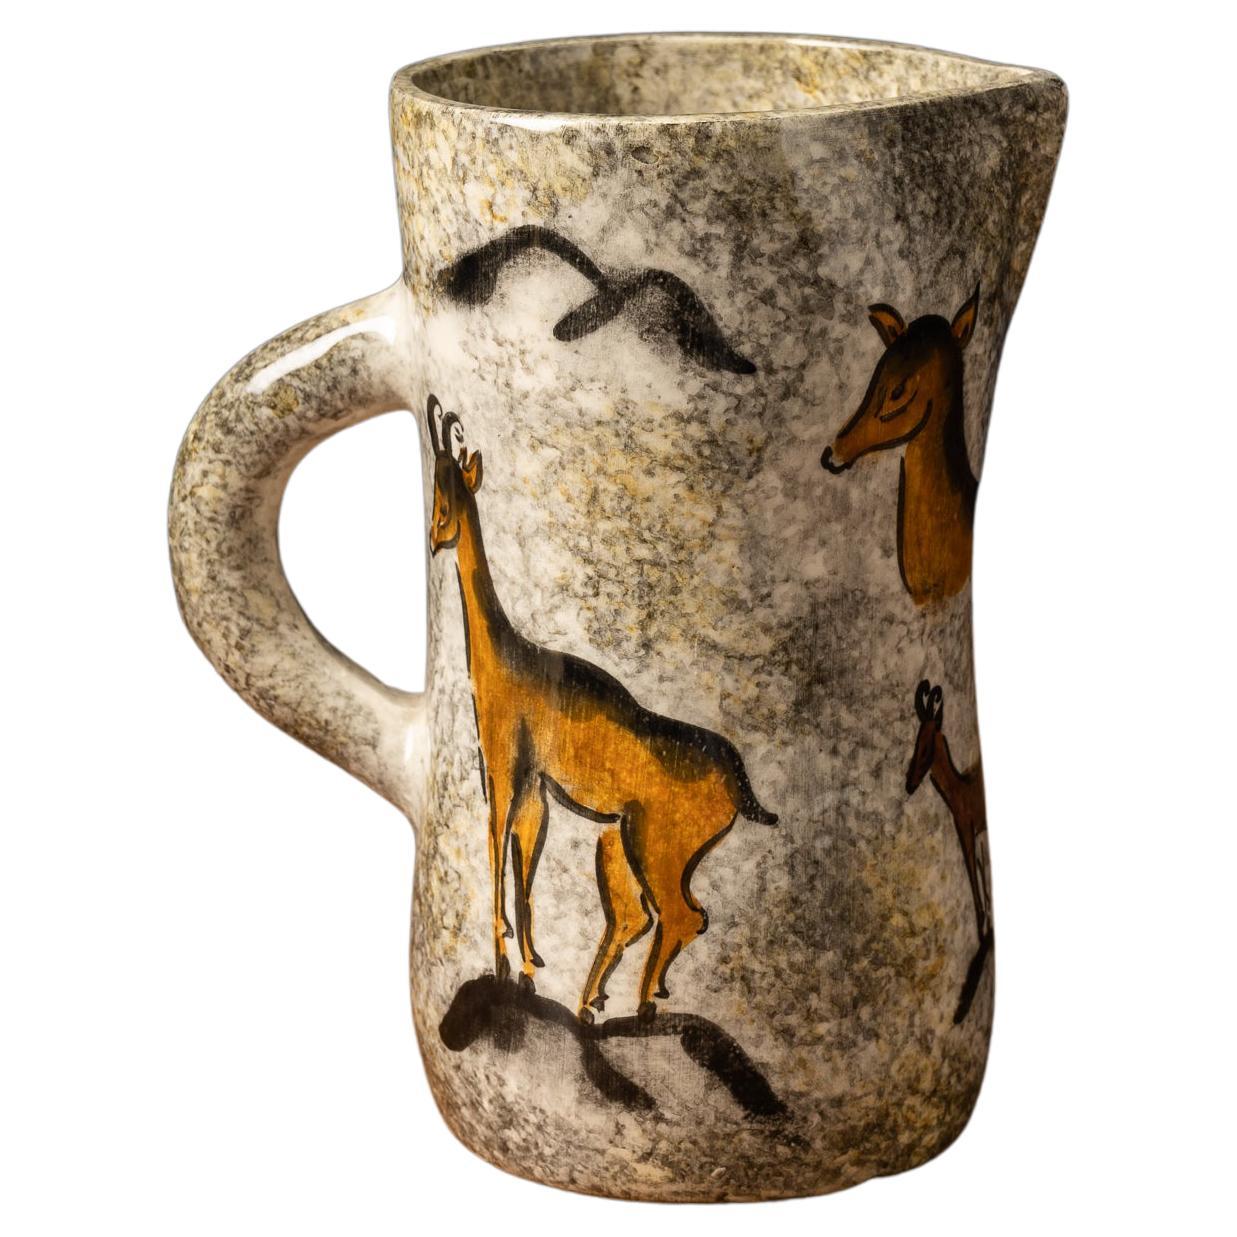 Handmade and Decorated Ceramic Pitcher with Handle